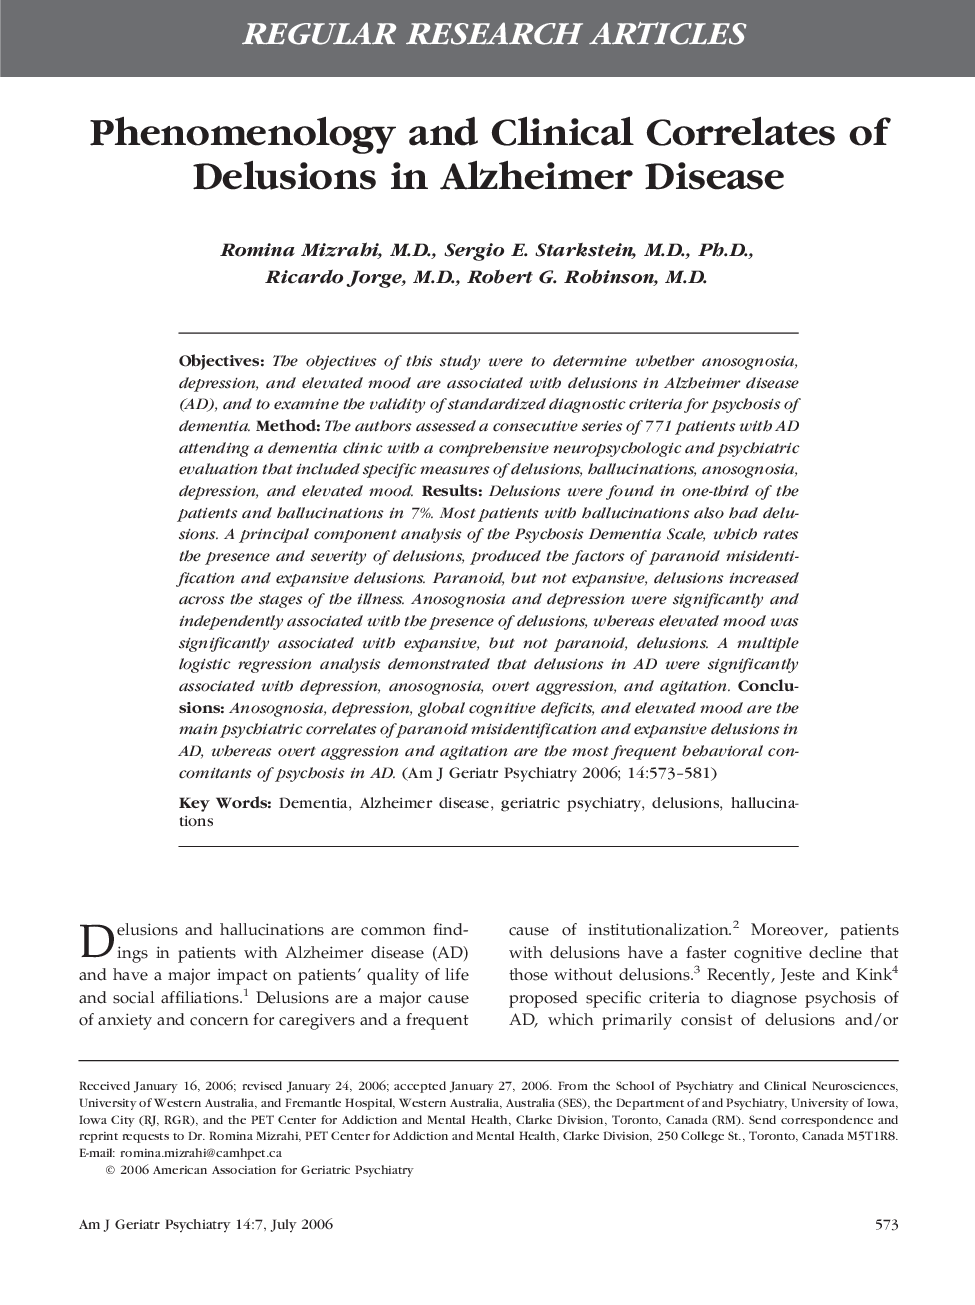 Phenomenology and Clinical Correlates of Delusions in Alzheimer Disease